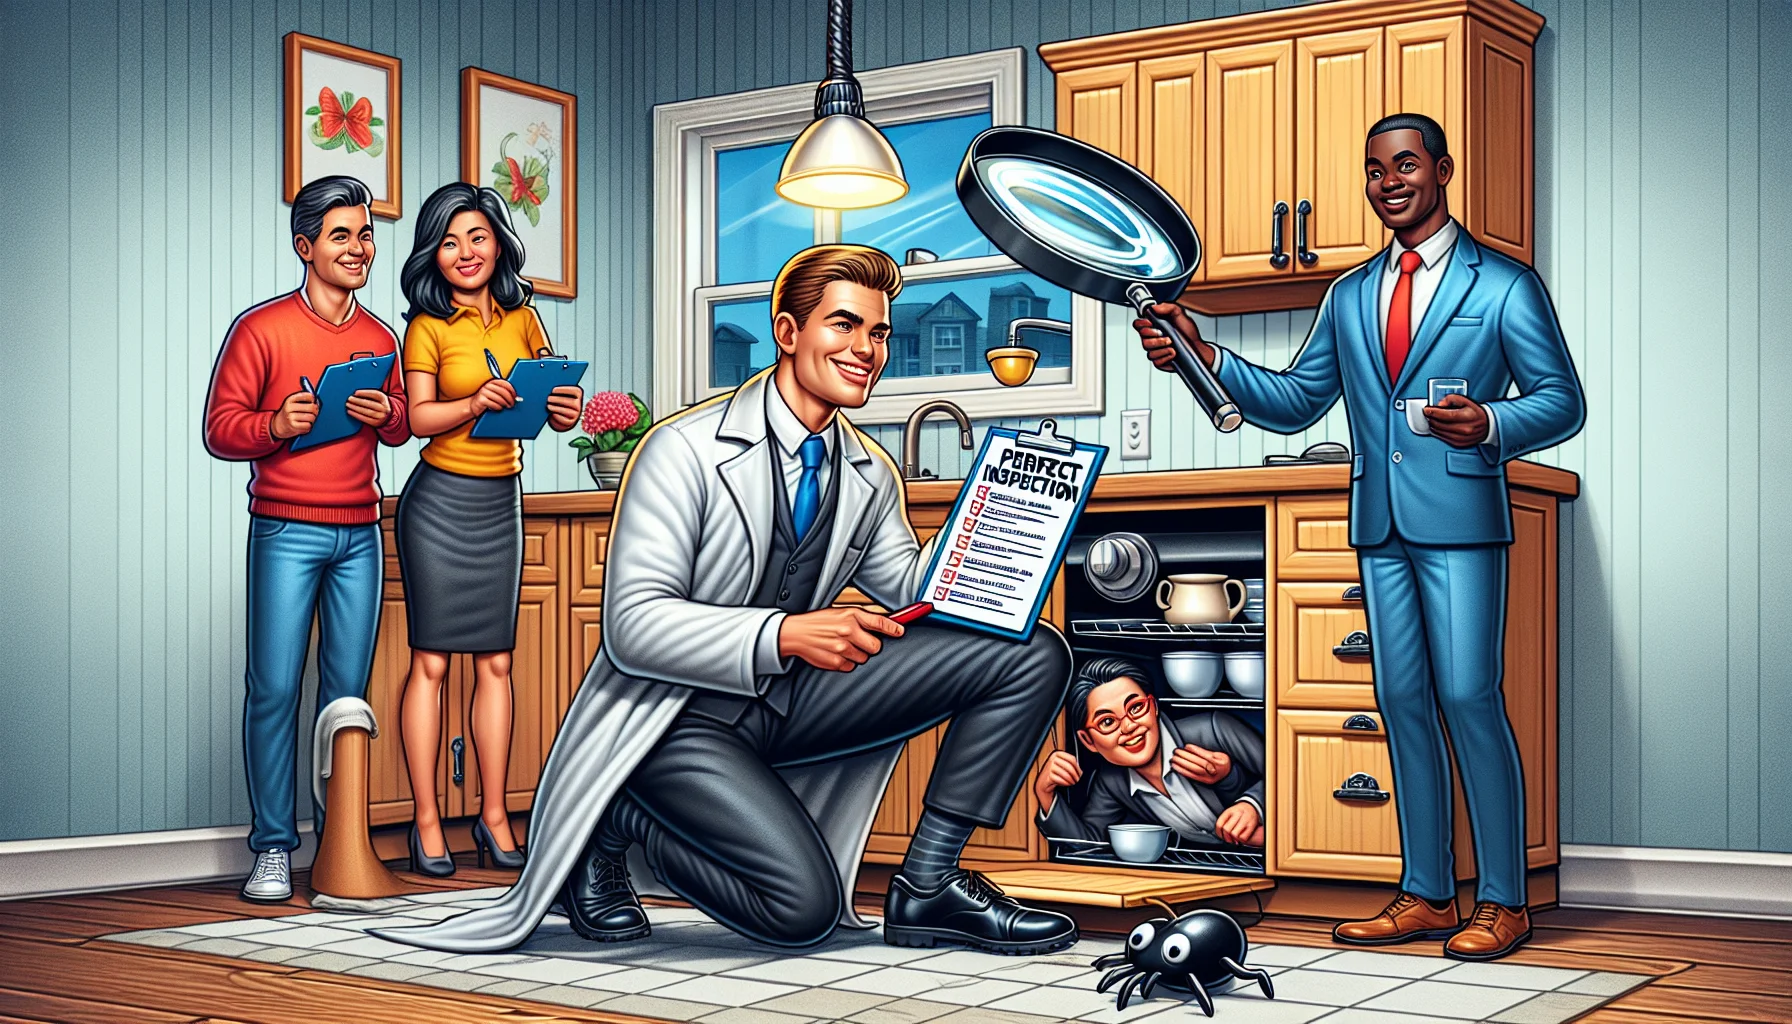 Create a realistic yet humorous image showcasing the ideal scenario for home inspection in real estate. The image should contain a Caucasian male inspector draped in a professional uniform. He is using an oversized magnifying glass to inspect an impeccably clean kitchen. To further emphasize the detailed inspection, have him squatting on the floor looking underneath the kitchen cabinet with a smile. On another side, a South Asian female homeowner is handing a perfect checklist, while a Black male realtor is presenting a 'Flawless House' certificate. Be sure to include fun little details like a sparkling faucet, a spotless oven, and overly fat house keys.